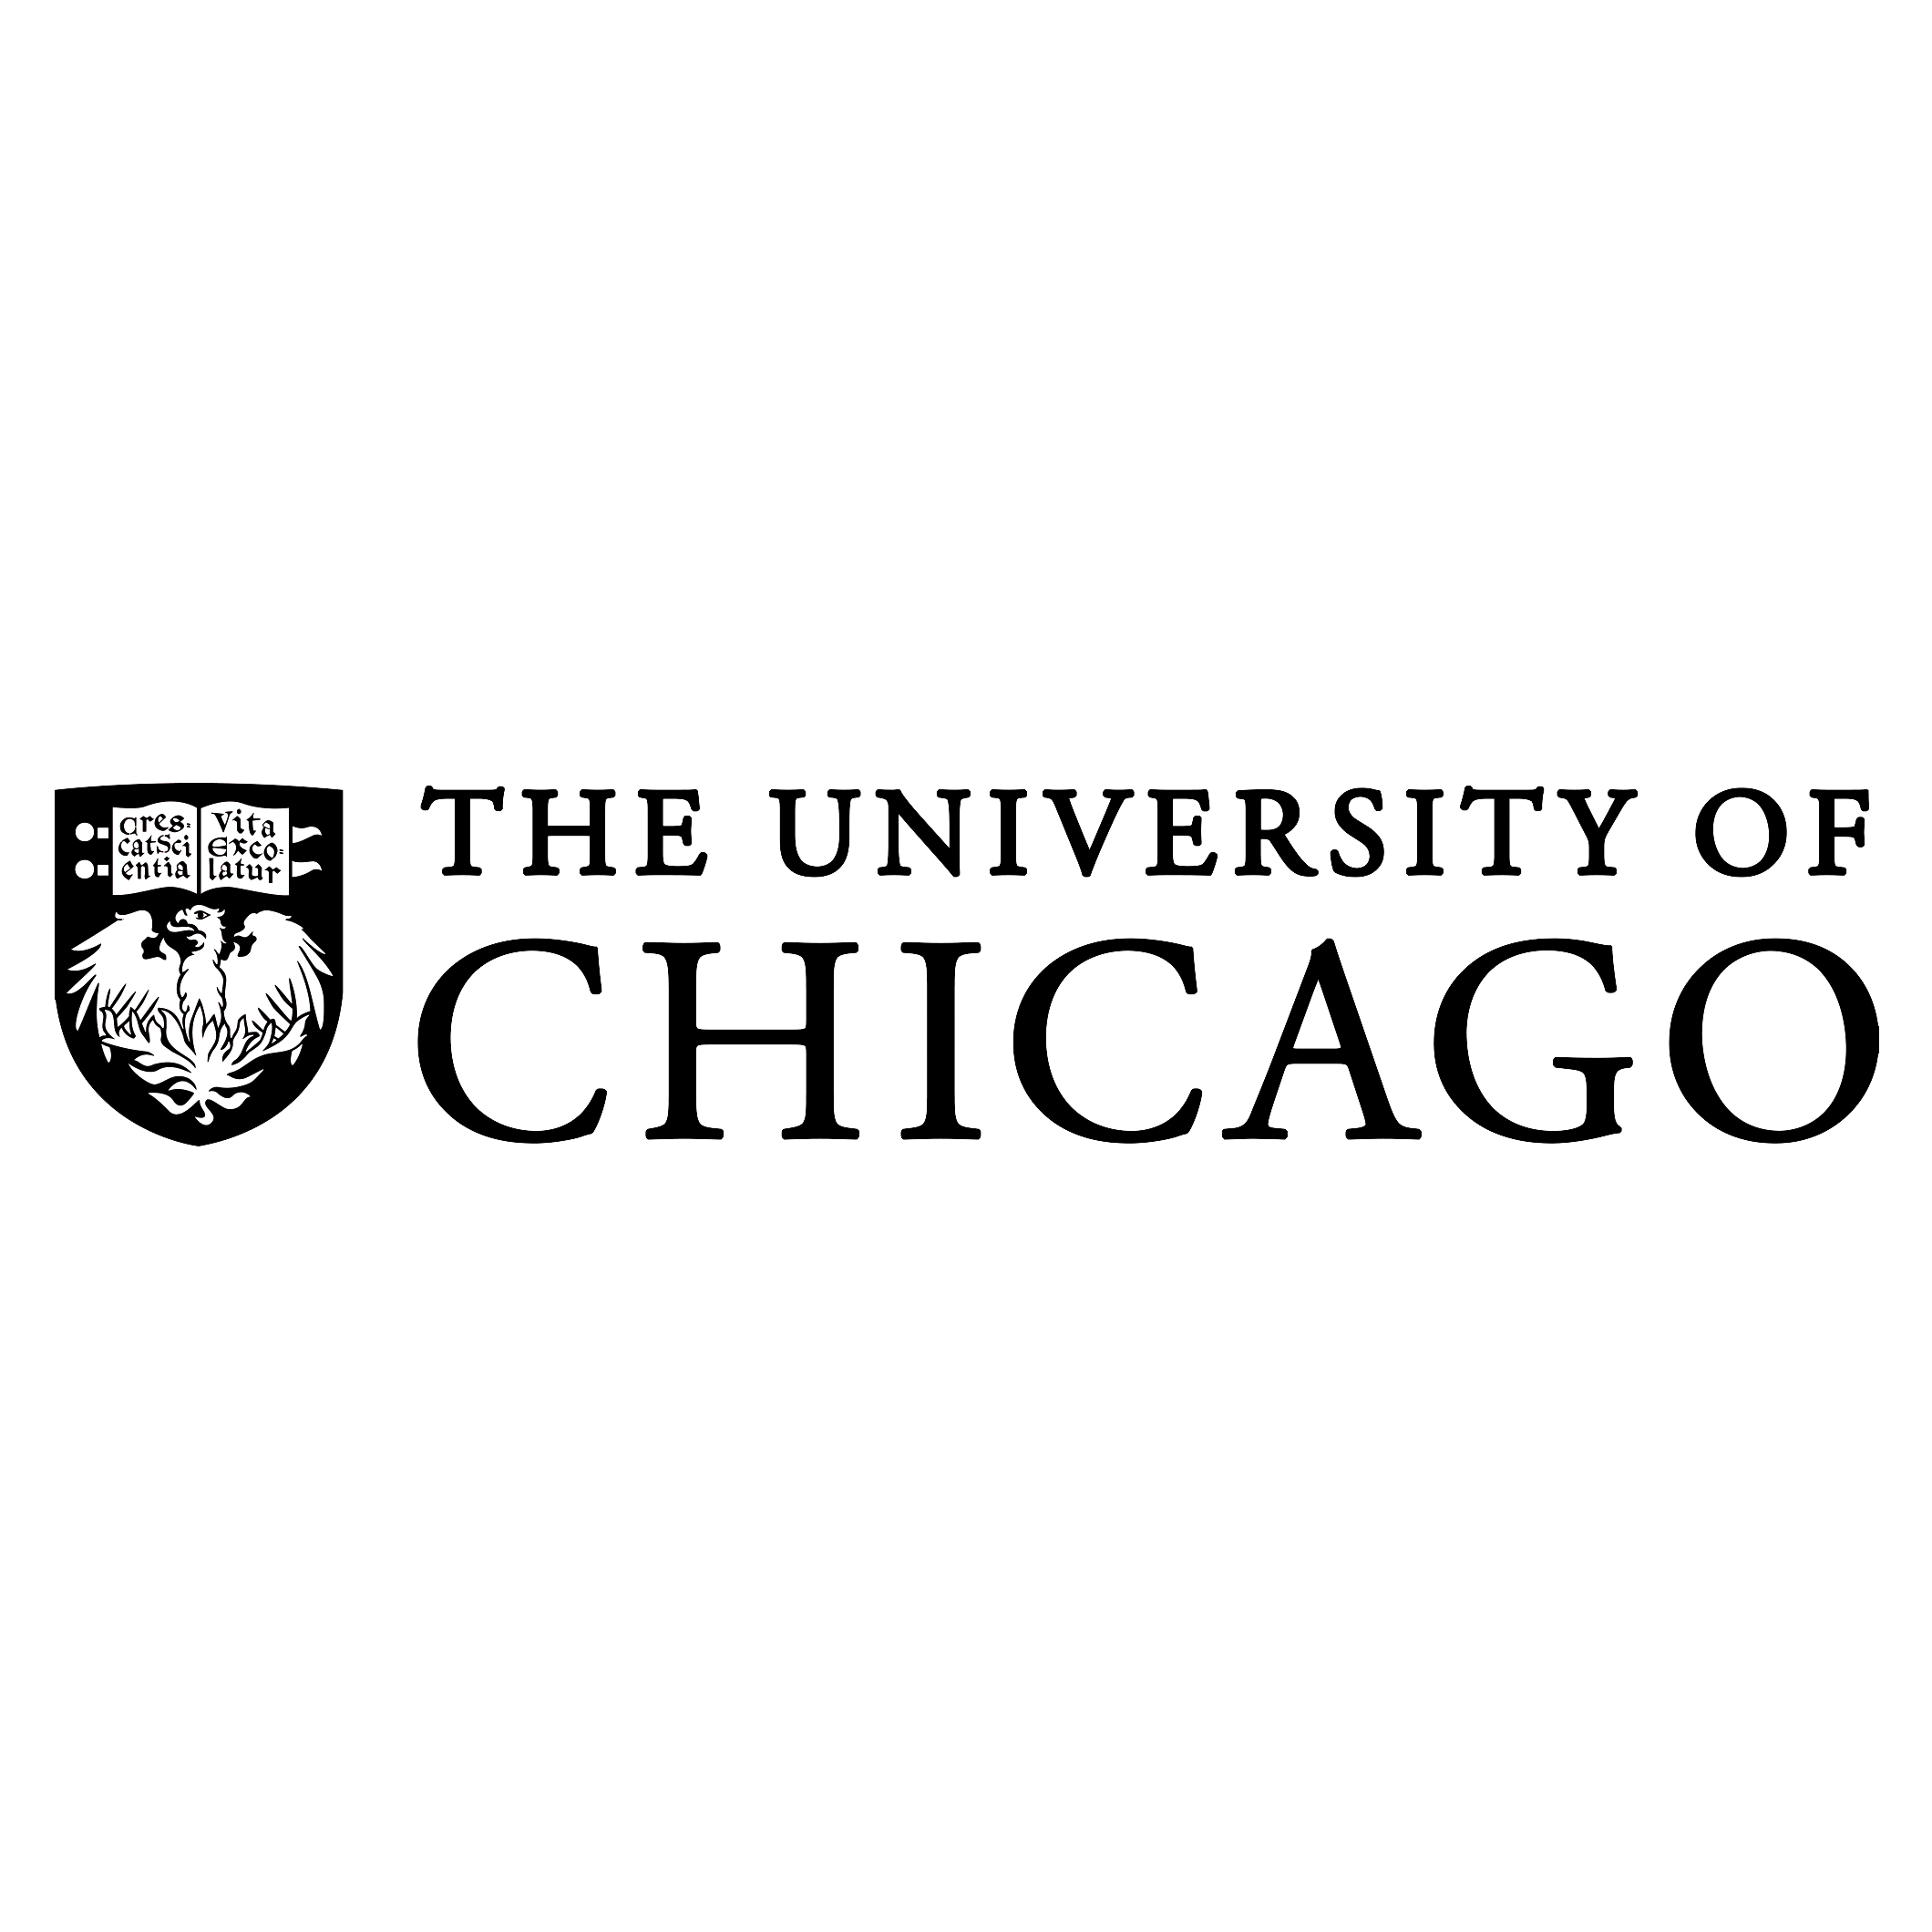 university of chicago (clients)bw.jpg